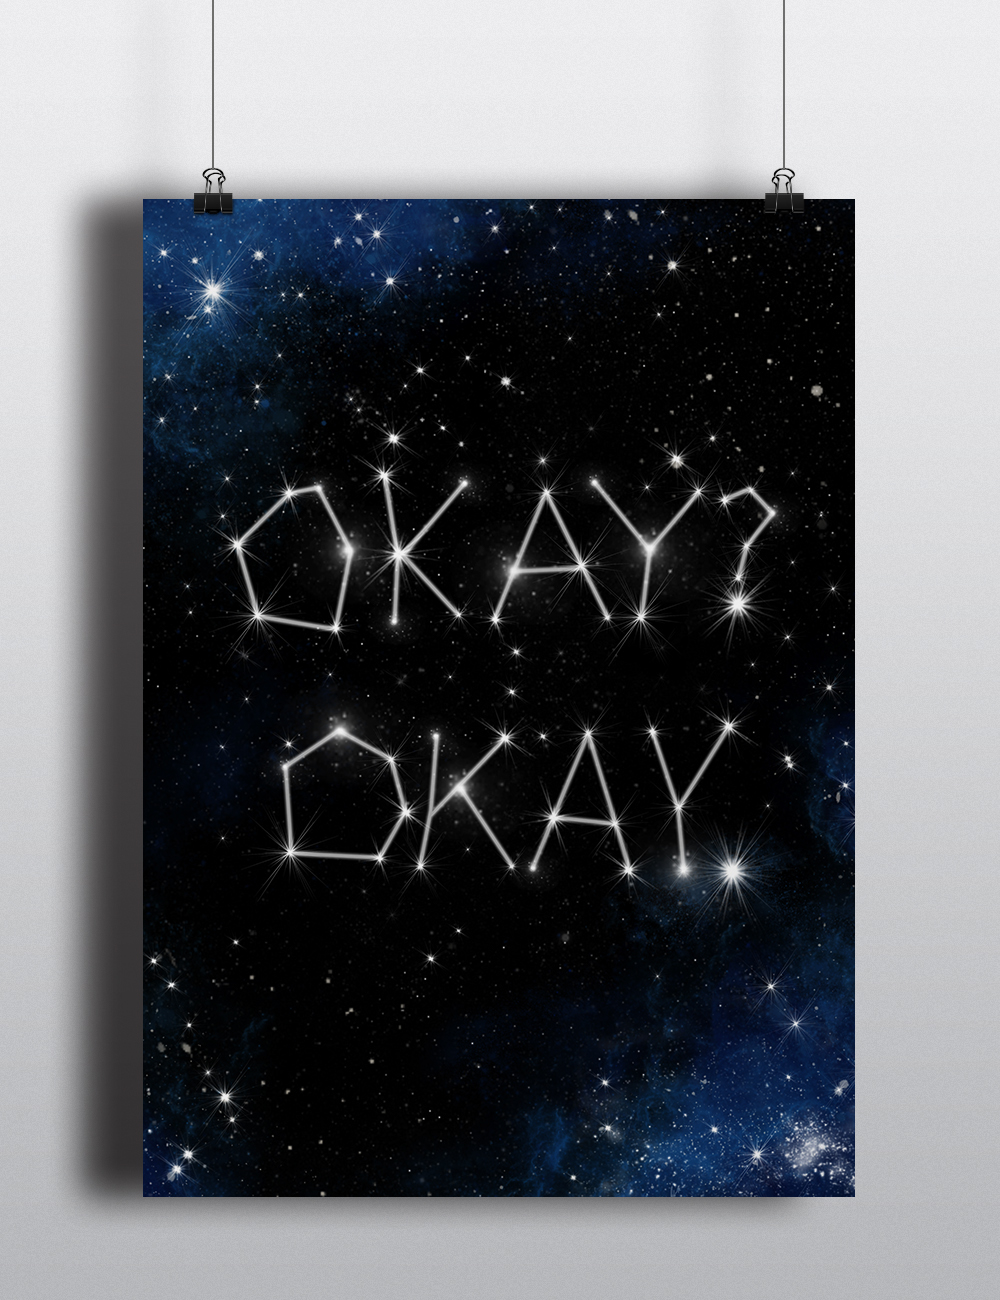 john green TFIOS the fault in our stars fault IN Our stars okay? okay. okay?okay. poster fandom nerdfighter dftba